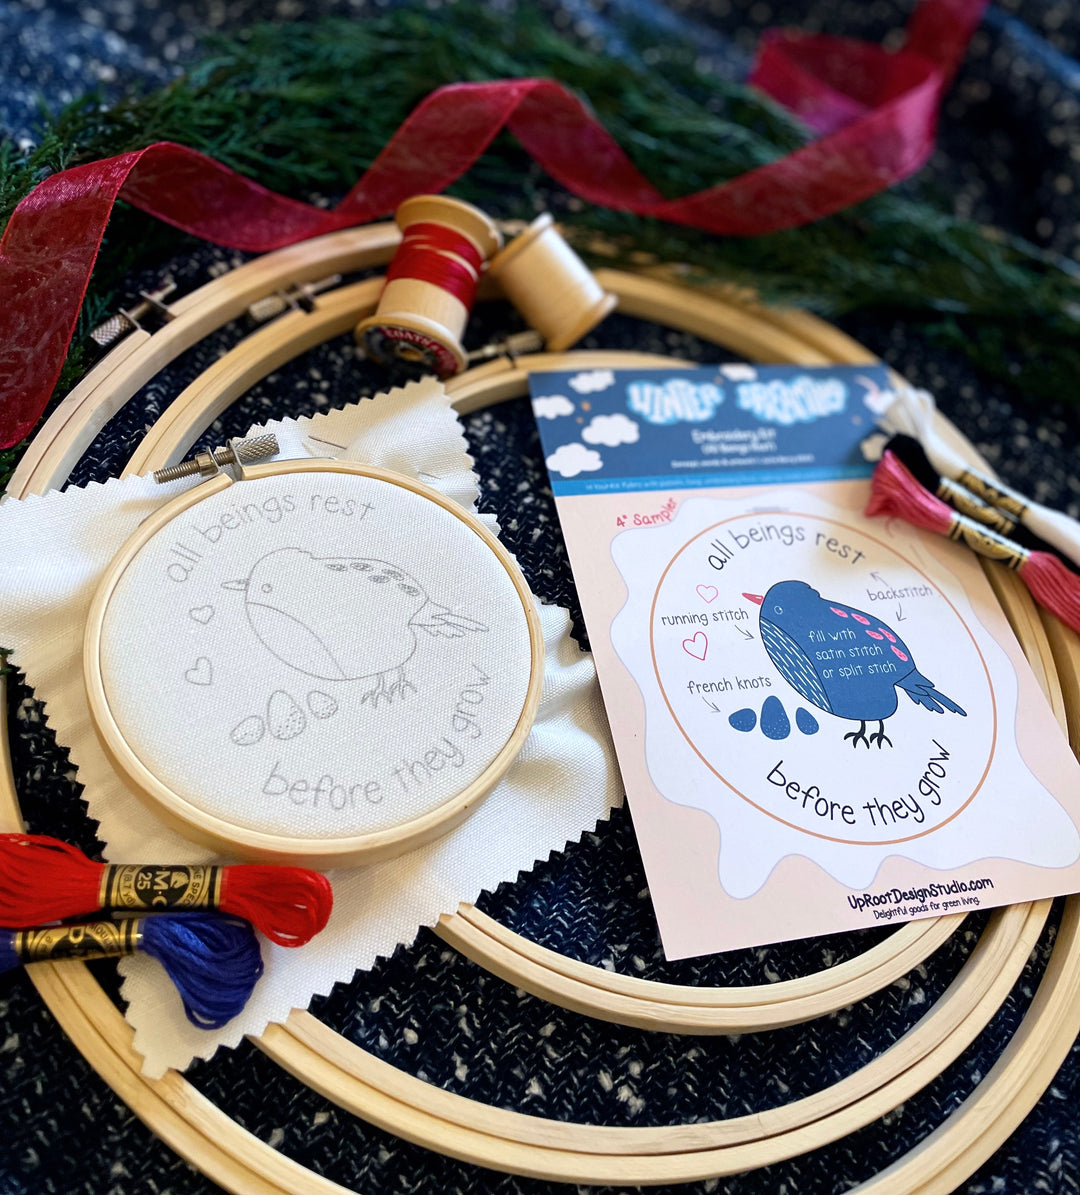 "All Beings Rest" Eco-Embroidery Kit w. Bird Pattern (Joyful Threads Winter Dreaming)